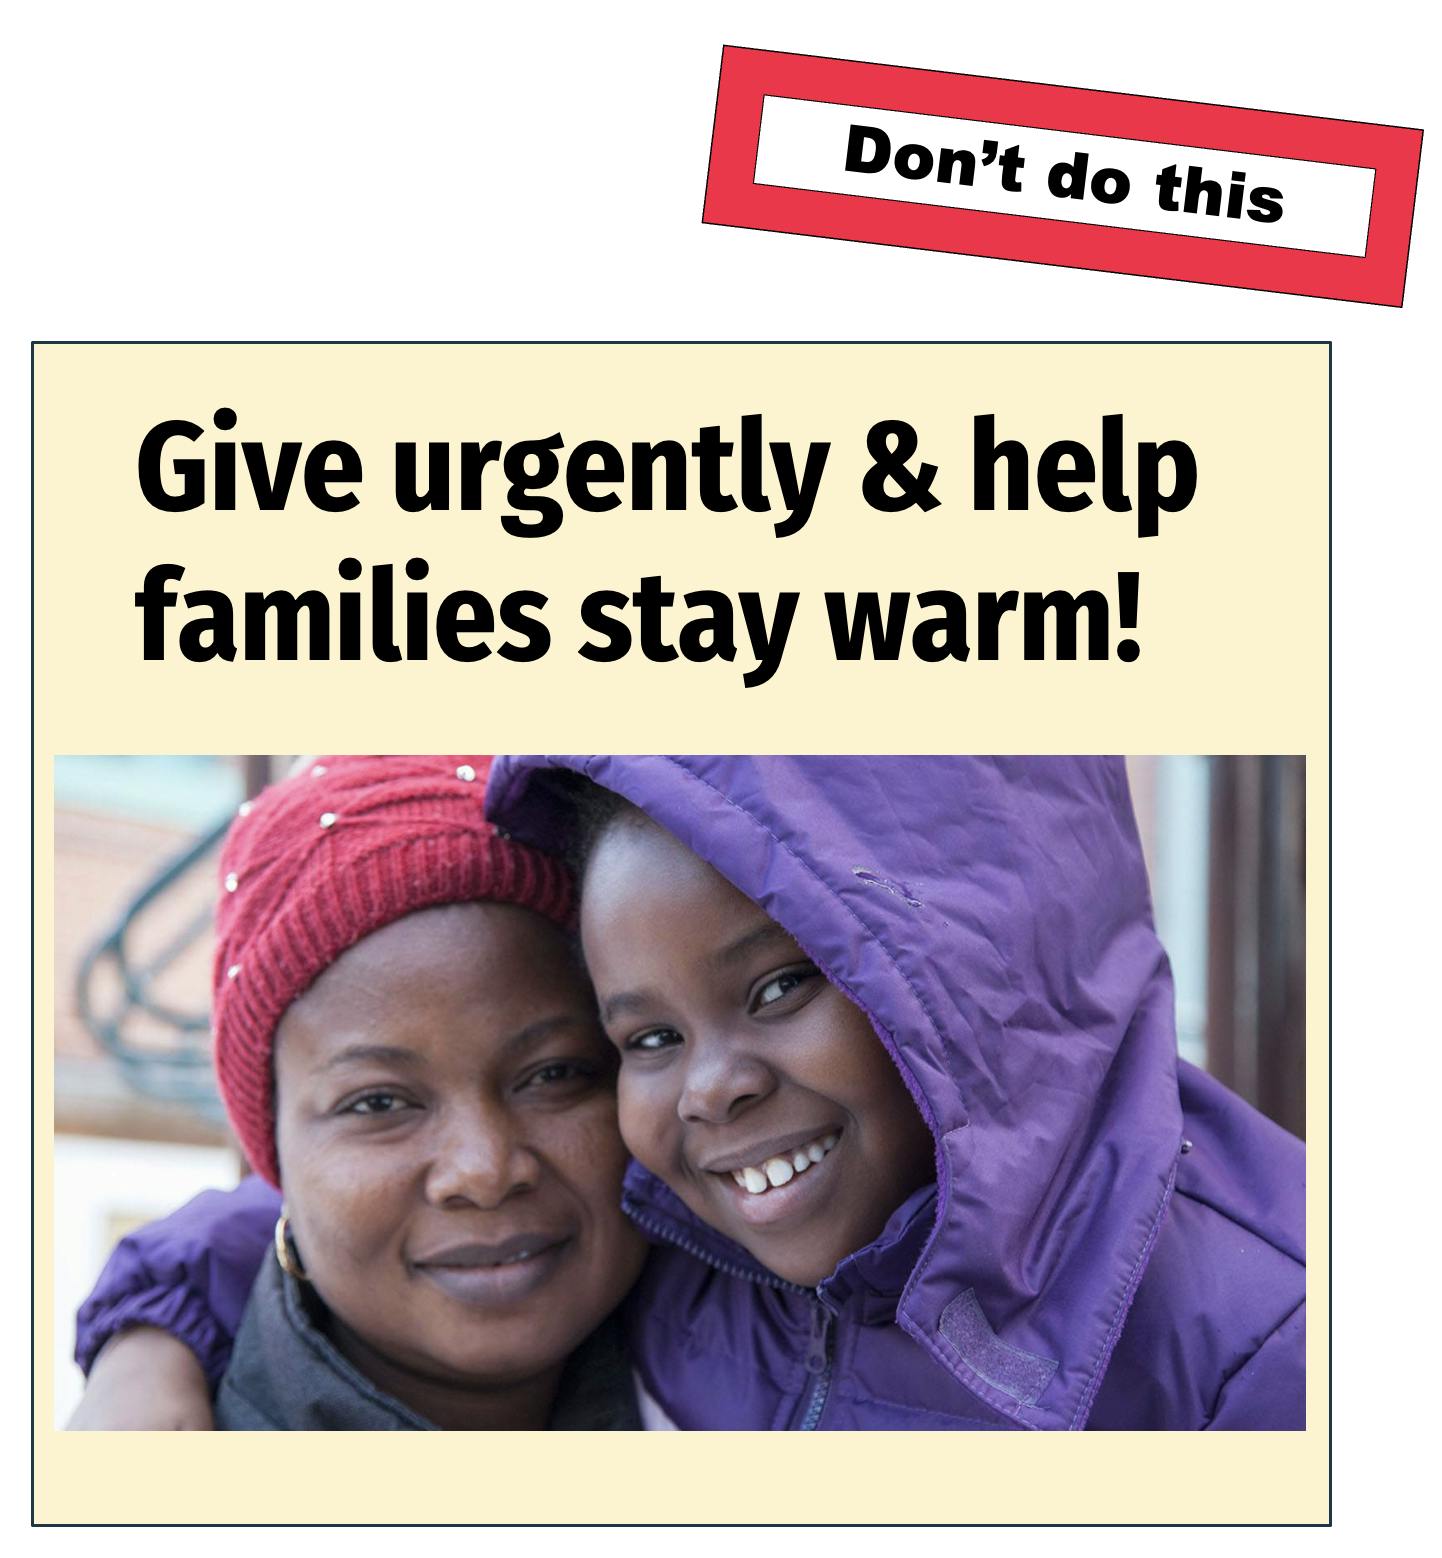 screenshot showing an image of a mother and daughter bundled up in warm winter gear, smiling, with the caption "Give urgently & help families stay warm!"